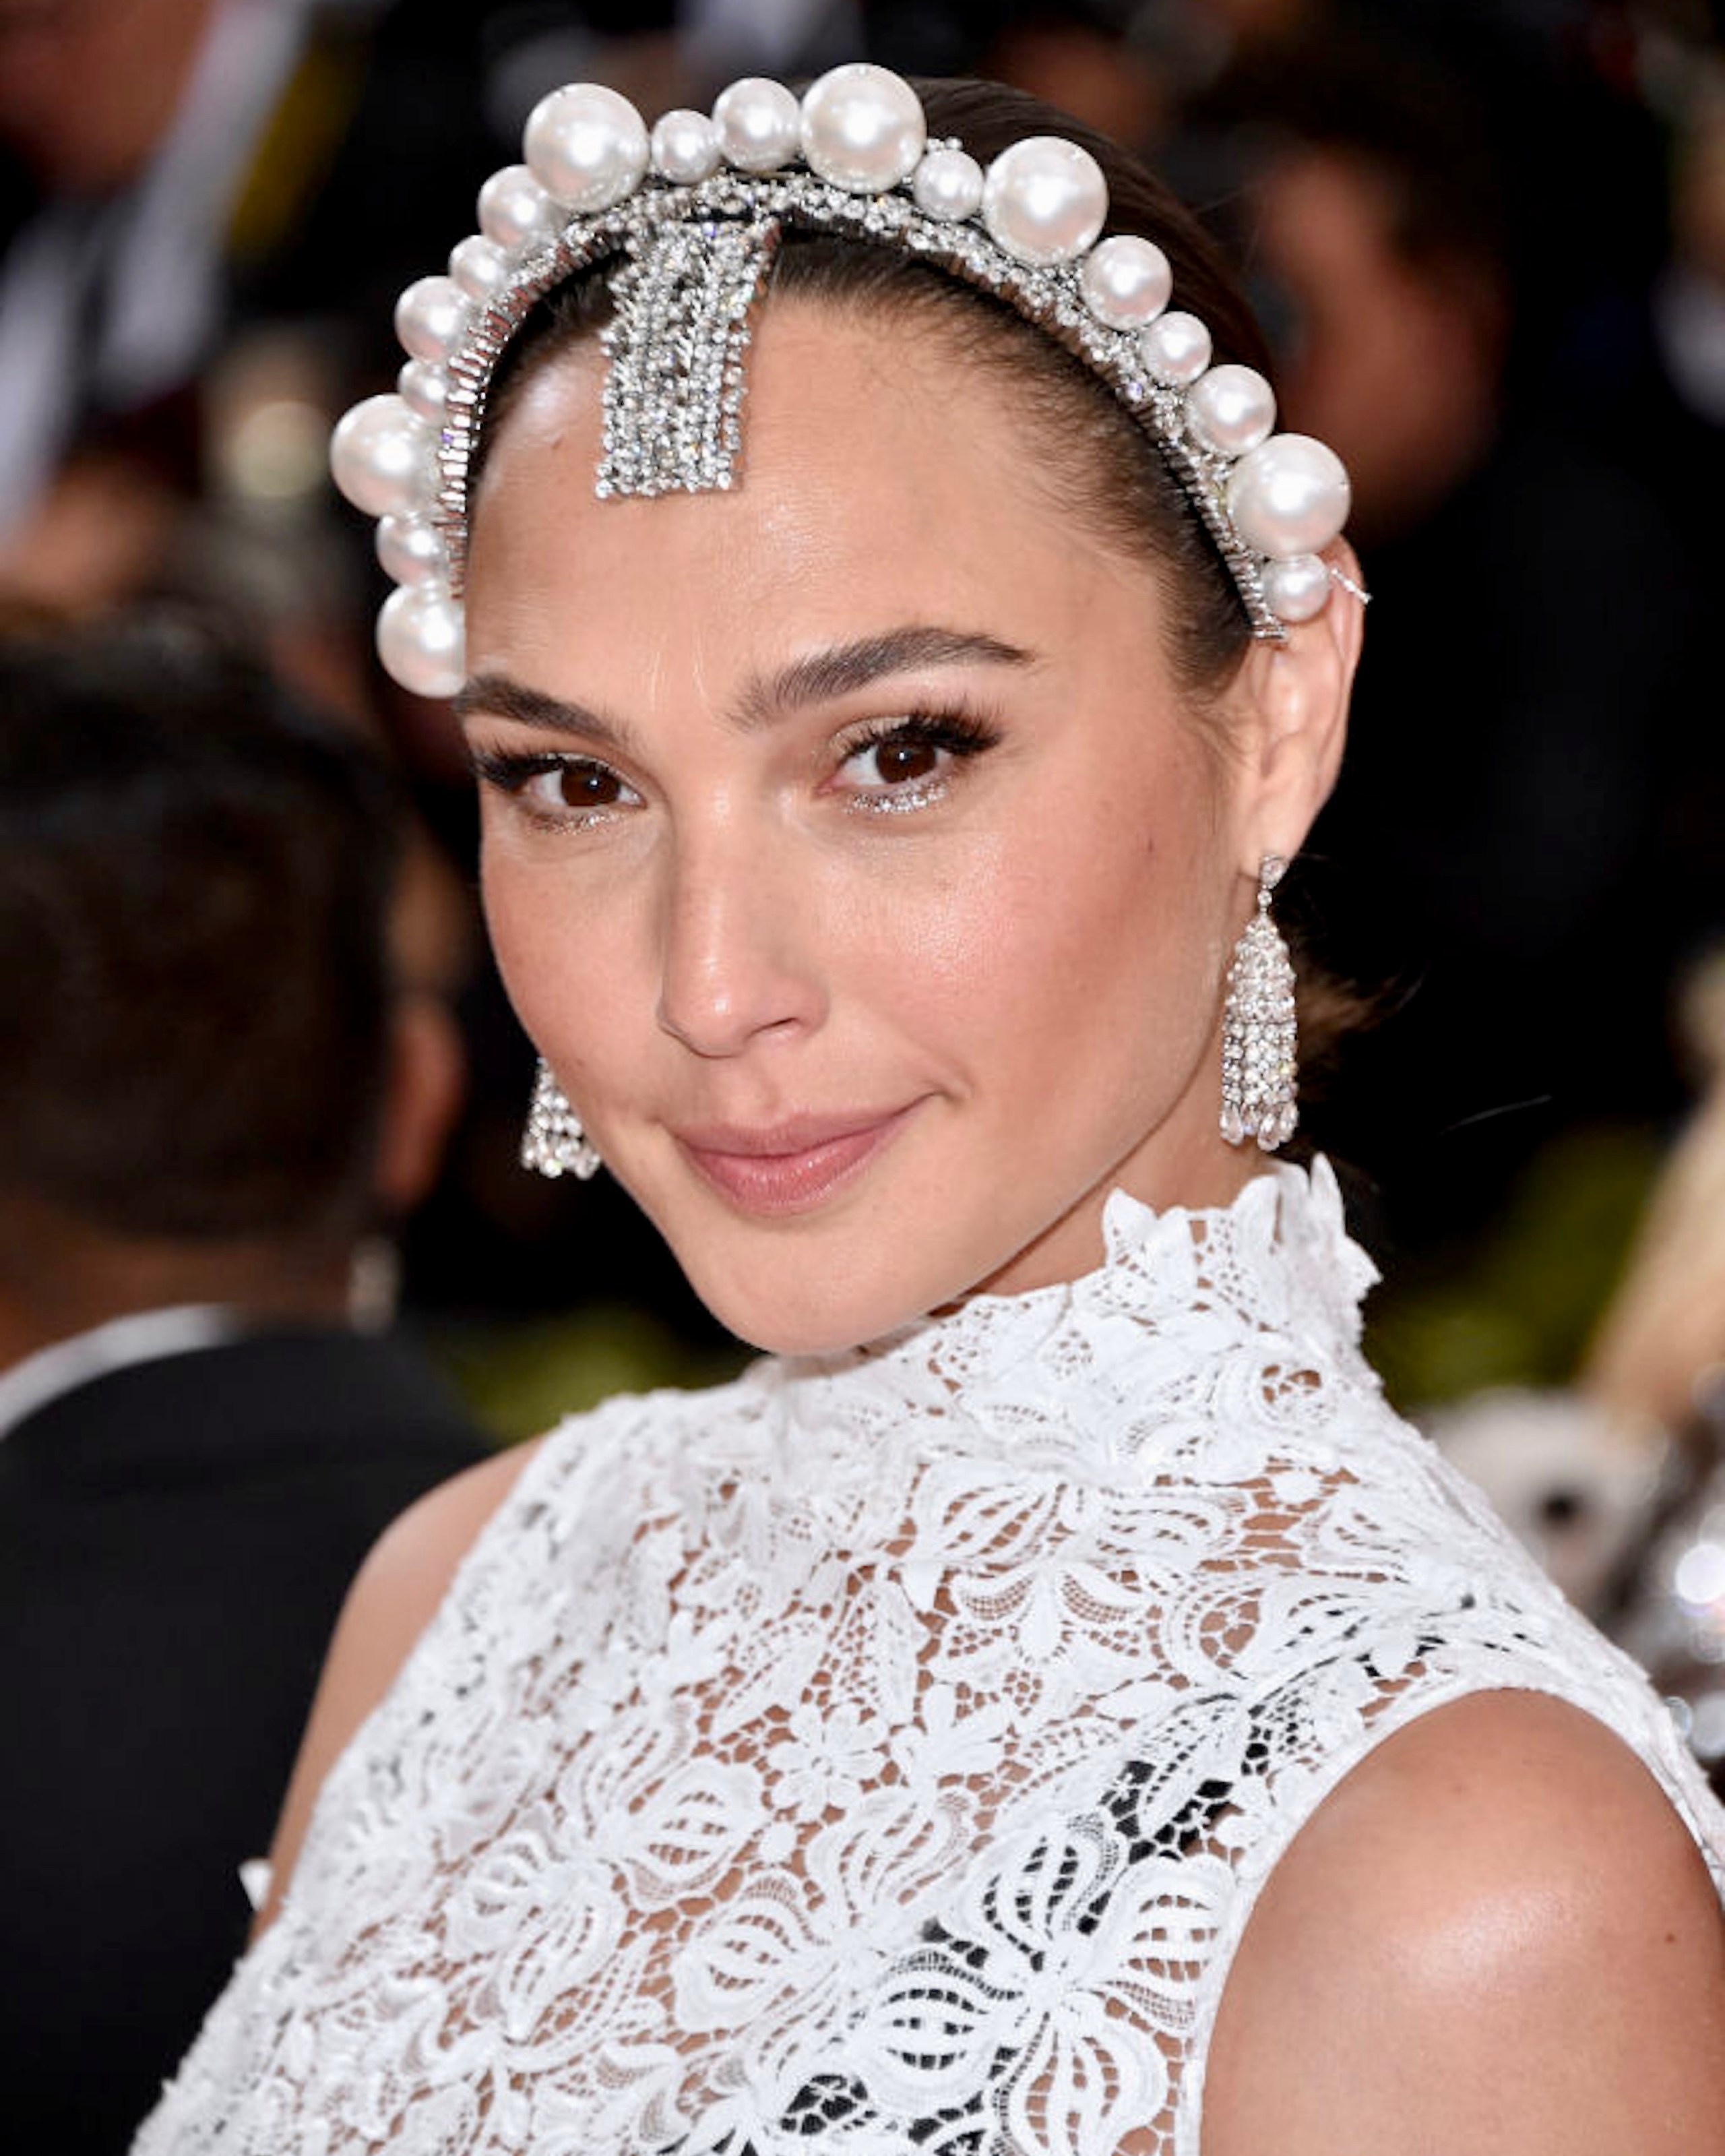 Gal Gadot shined in natural diamond jewelry at the 2019 Met Gala.